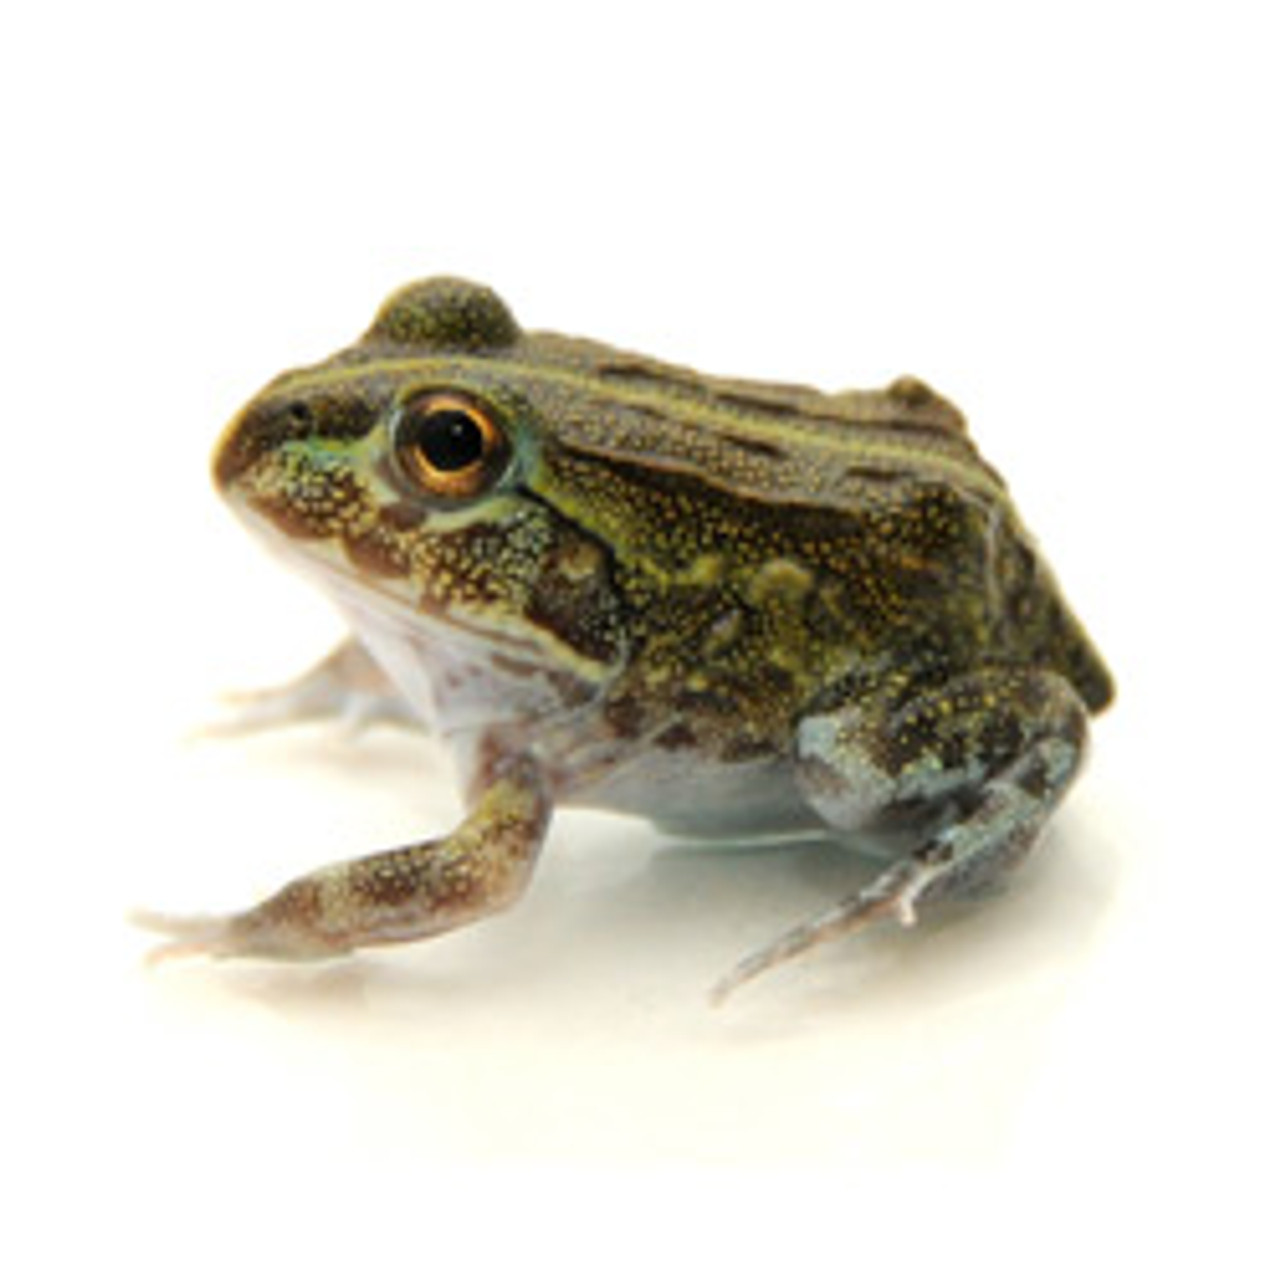 Southern Pixie Frog